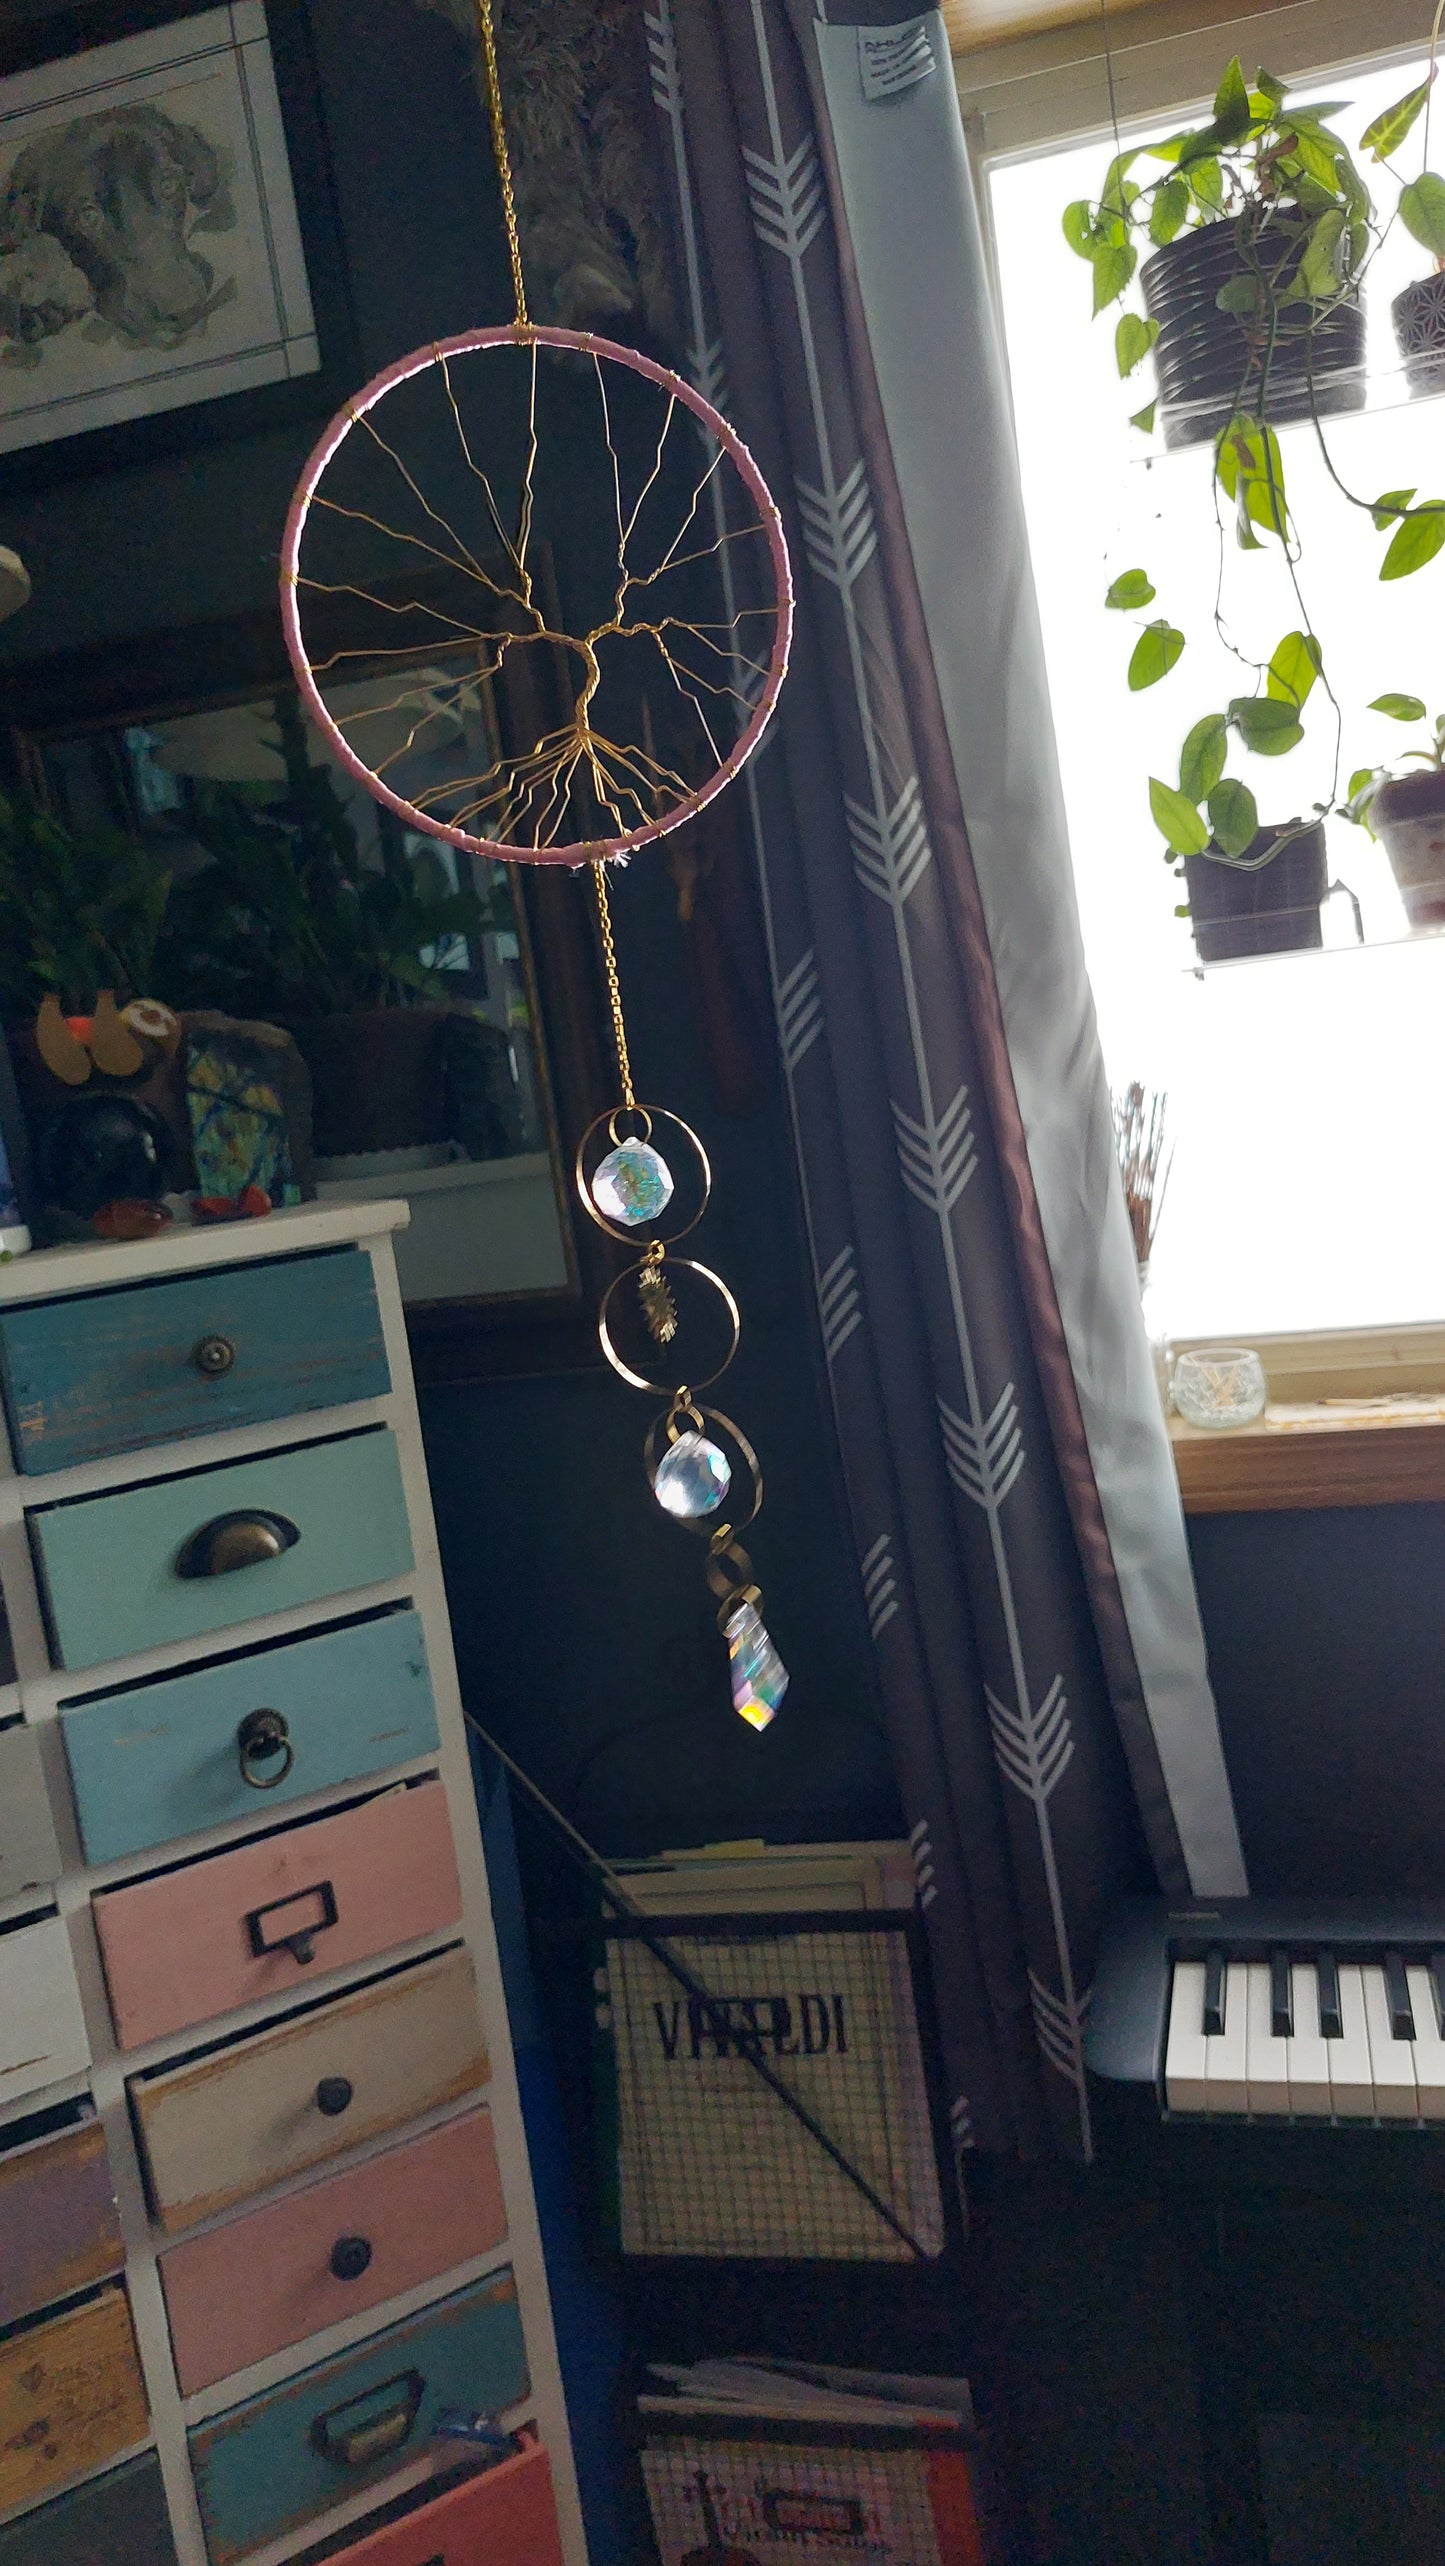 Pink and Gold Tree of Life Dream catcher with celestial rainbow maker